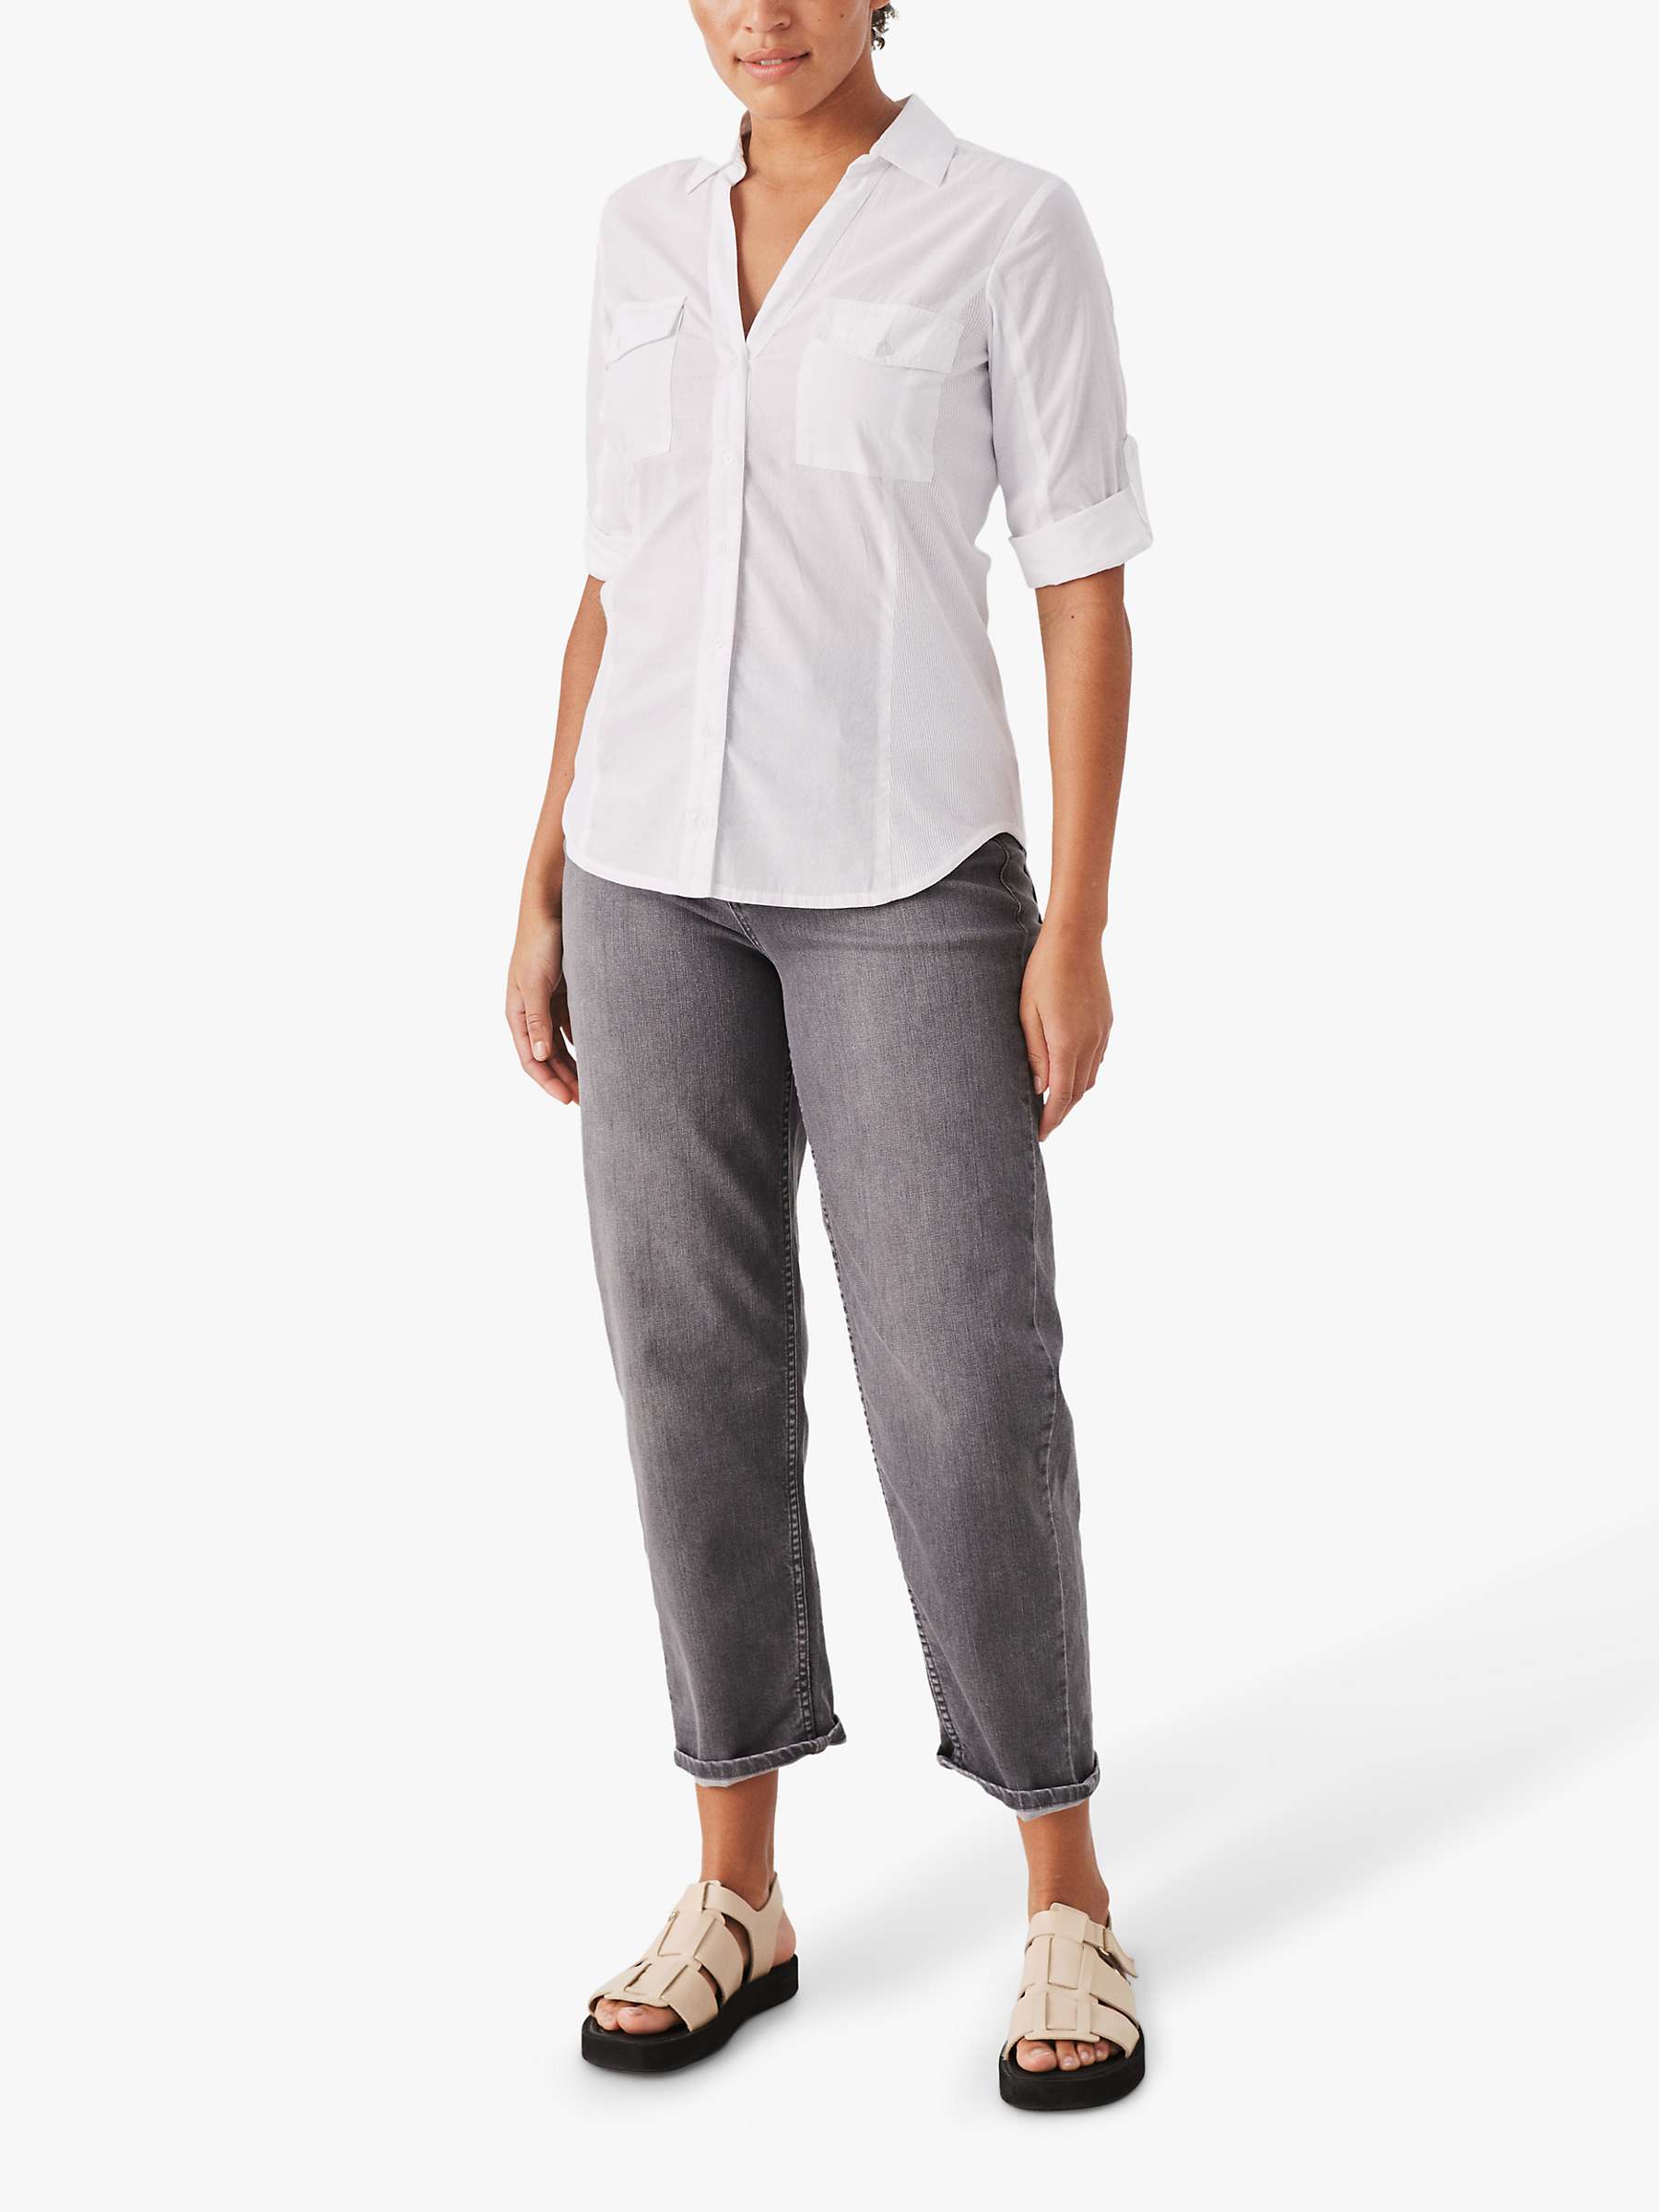 Buy Part Two Cortnia Fitted Shirt Online at johnlewis.com